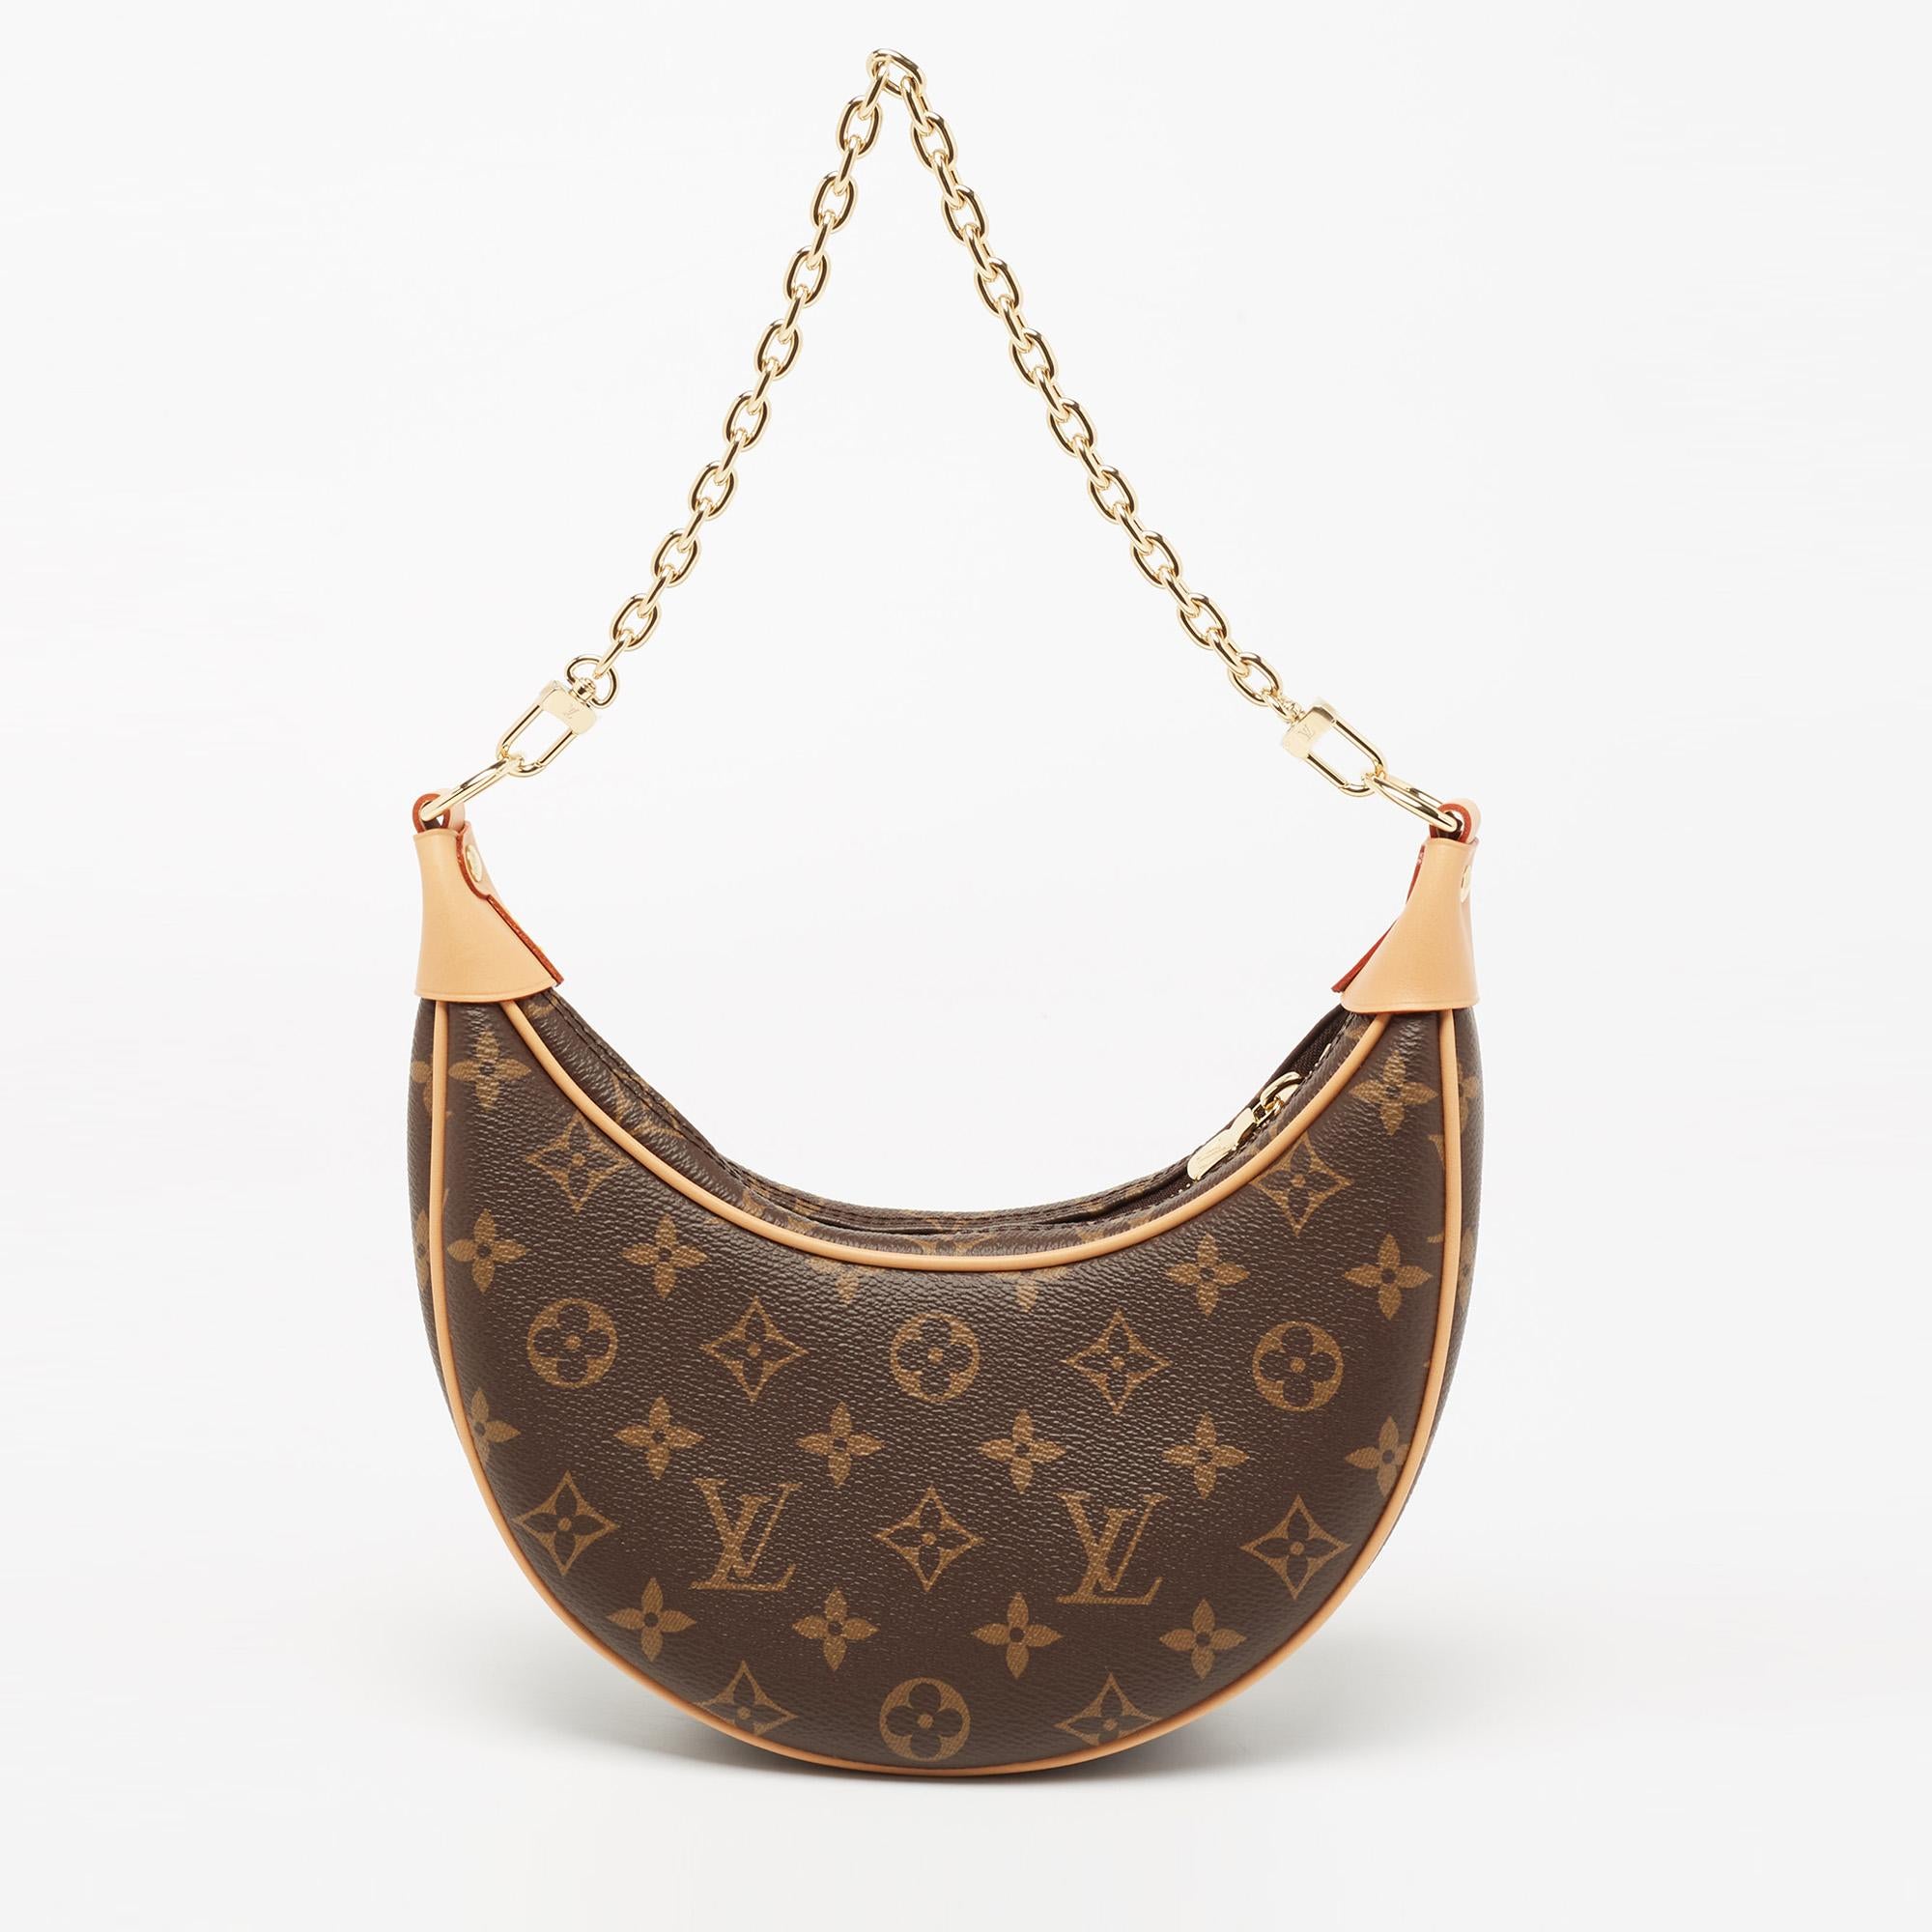 For years, women have leaned towards Louis Vuitton's handbags when it comes to powering their personal style. This amazing LV bag is durable and super-chic. Crafted from coated canvas and leather, it comes with a single chain handle and an